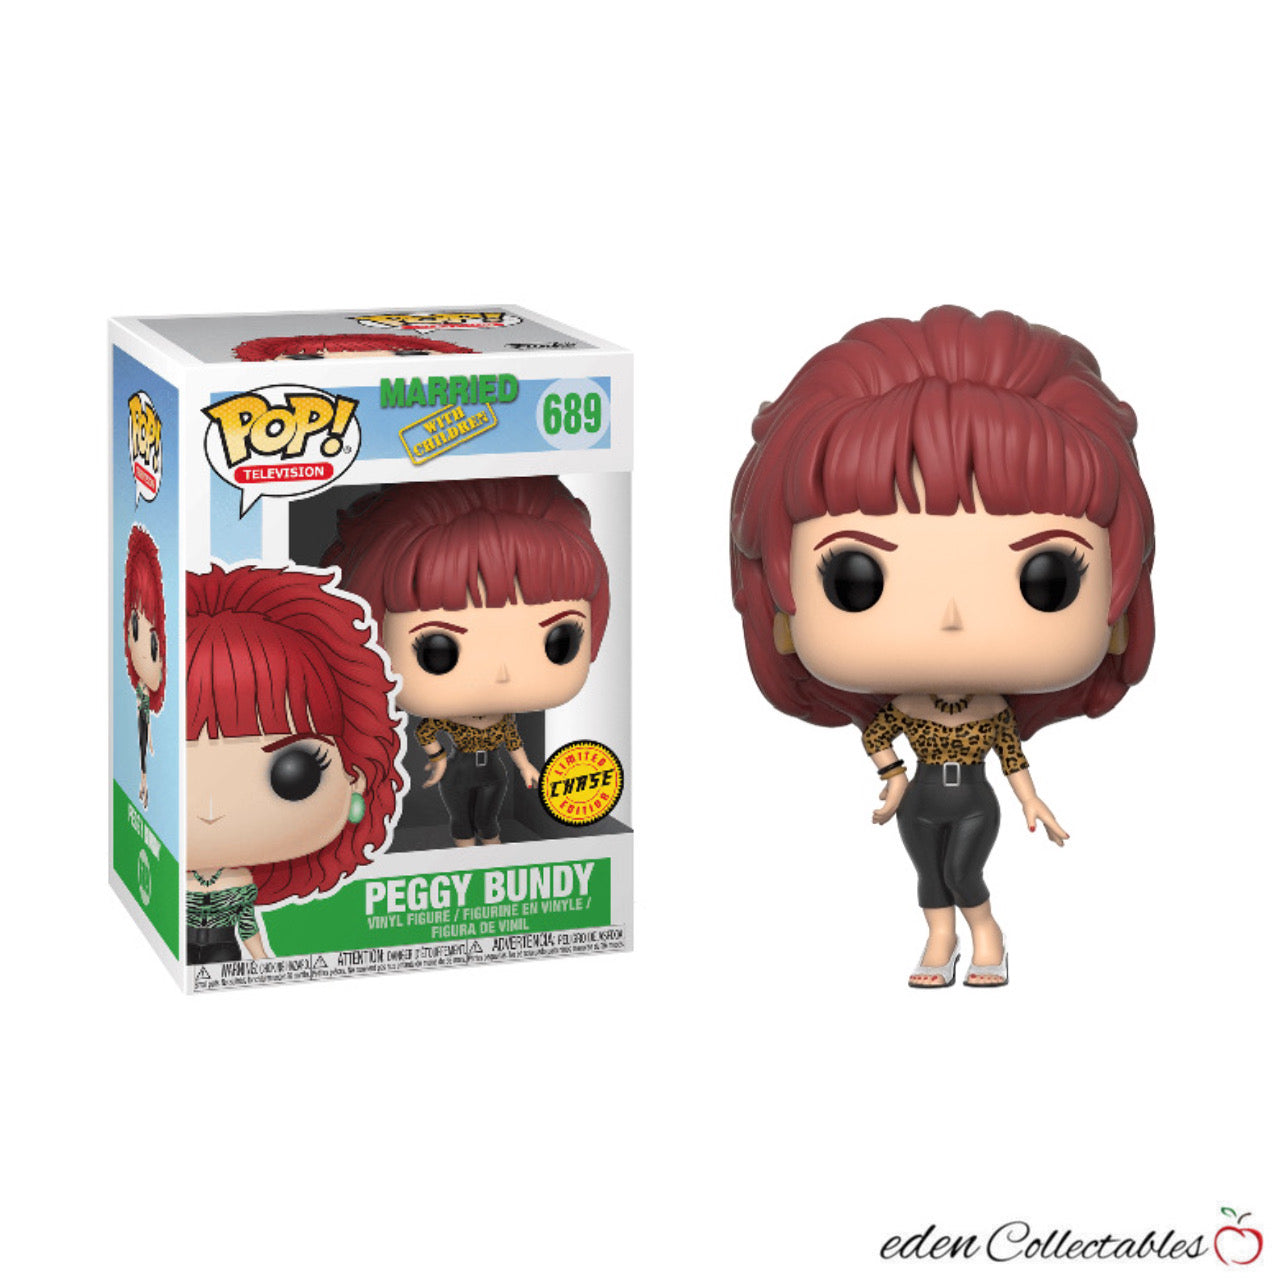 Married with Children: Peggy Bundy Chase Funko Pop